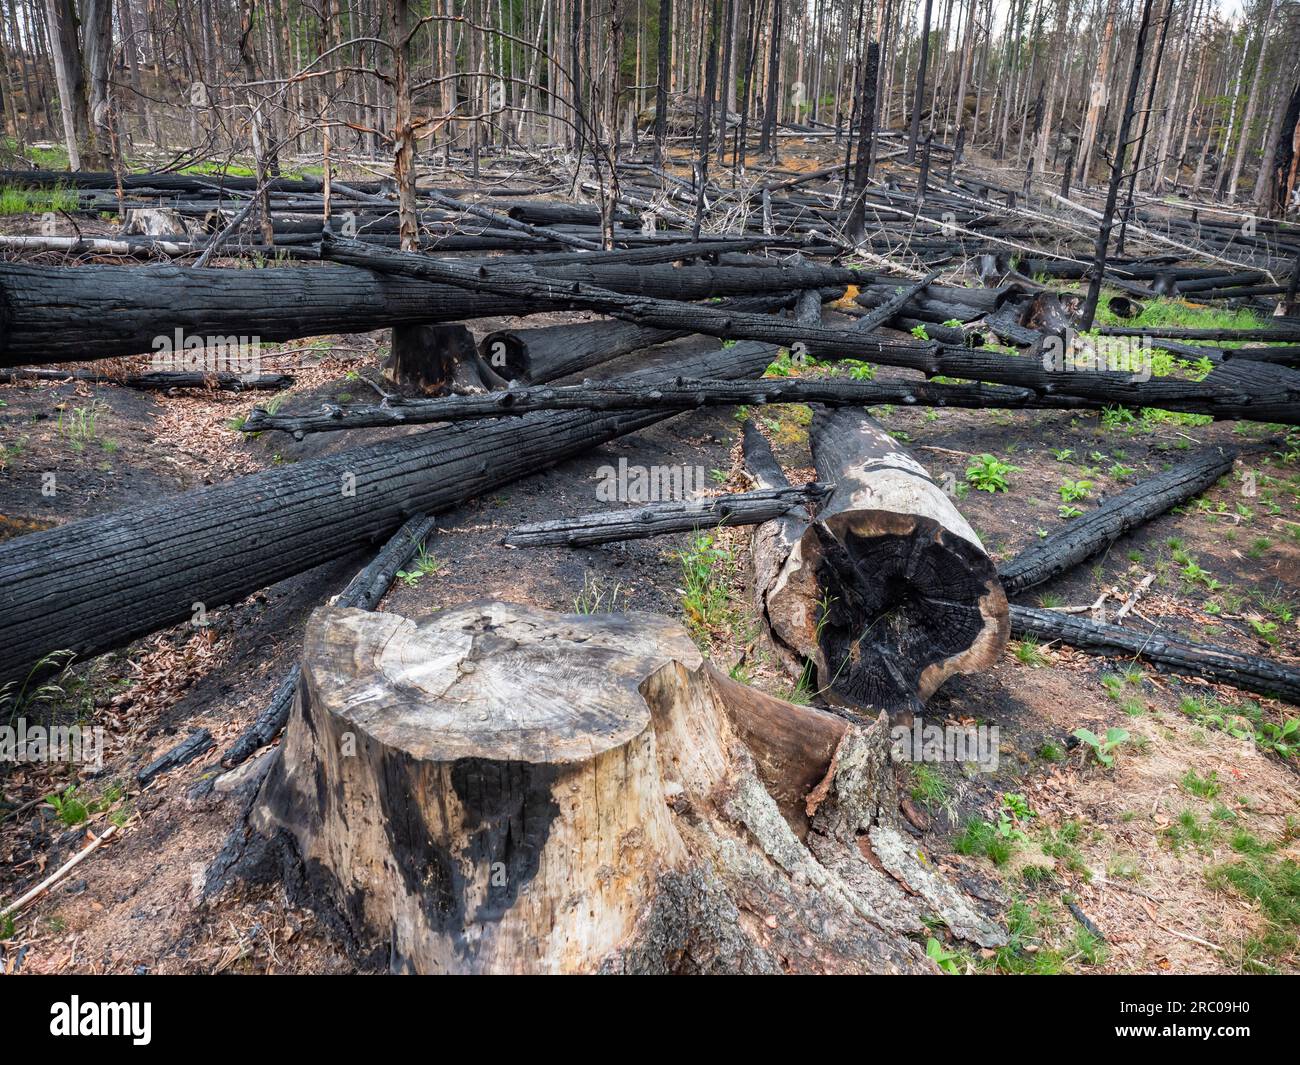 Firefighters cut down trees to fight the fire more effectively. Big tragedy in natural park Stock Photo